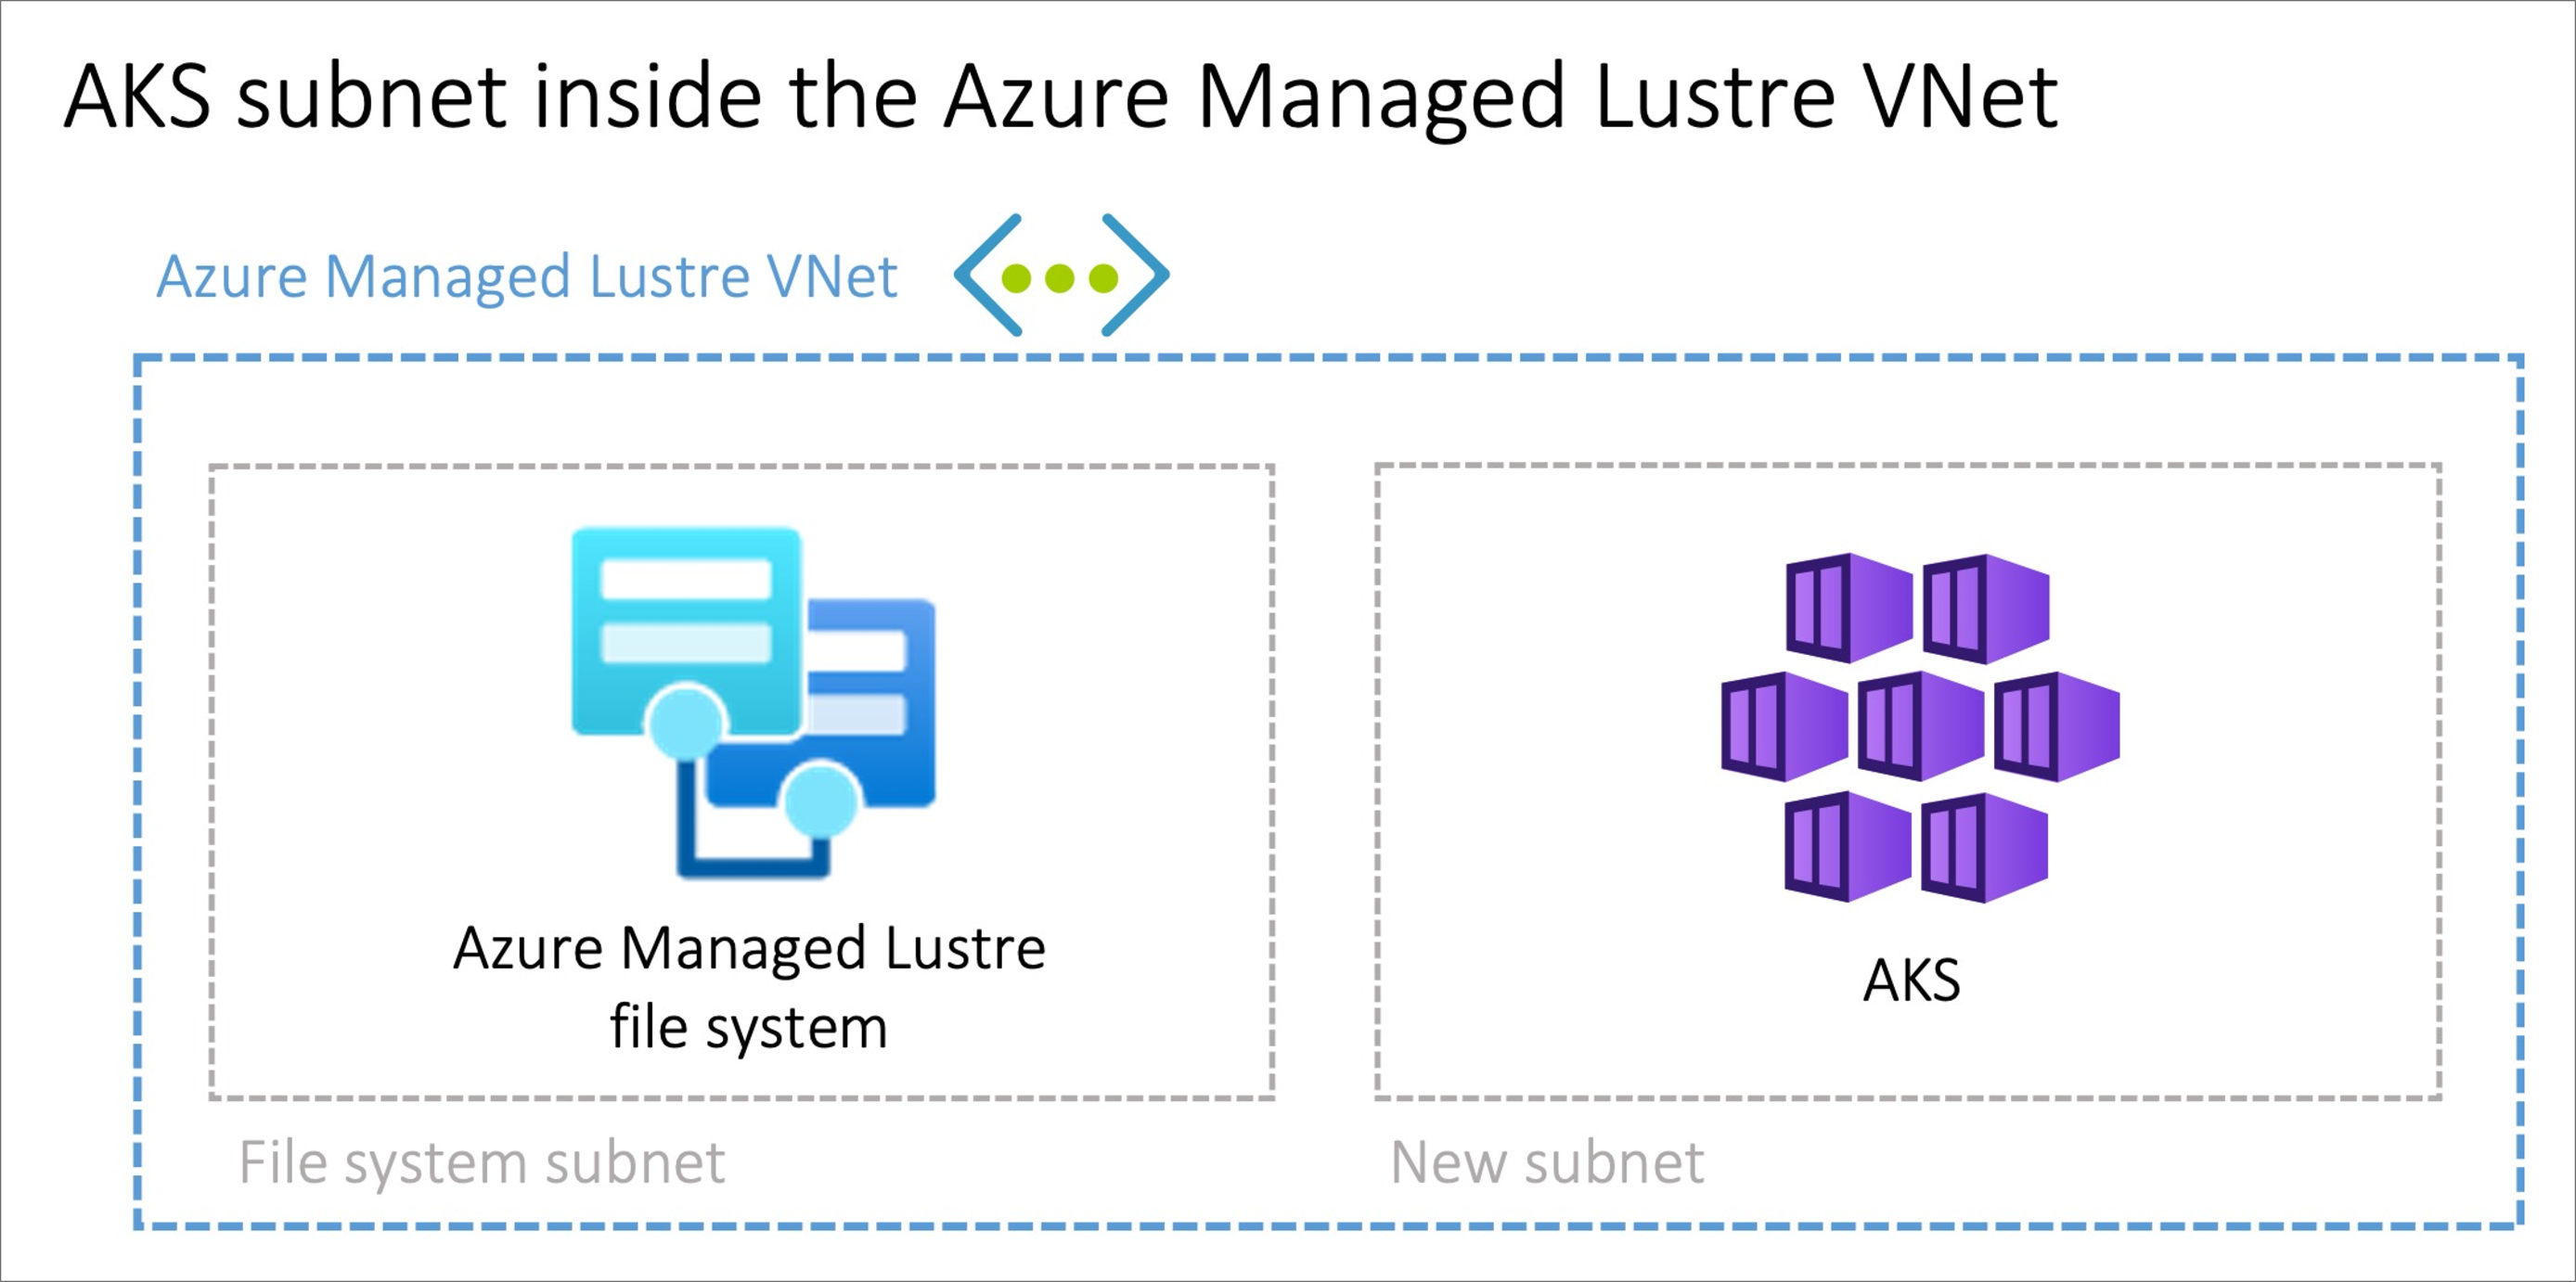 Diagram showing Azure Managed Lustre VNet with two subnets, one for the Lustre file system and one for AKS.